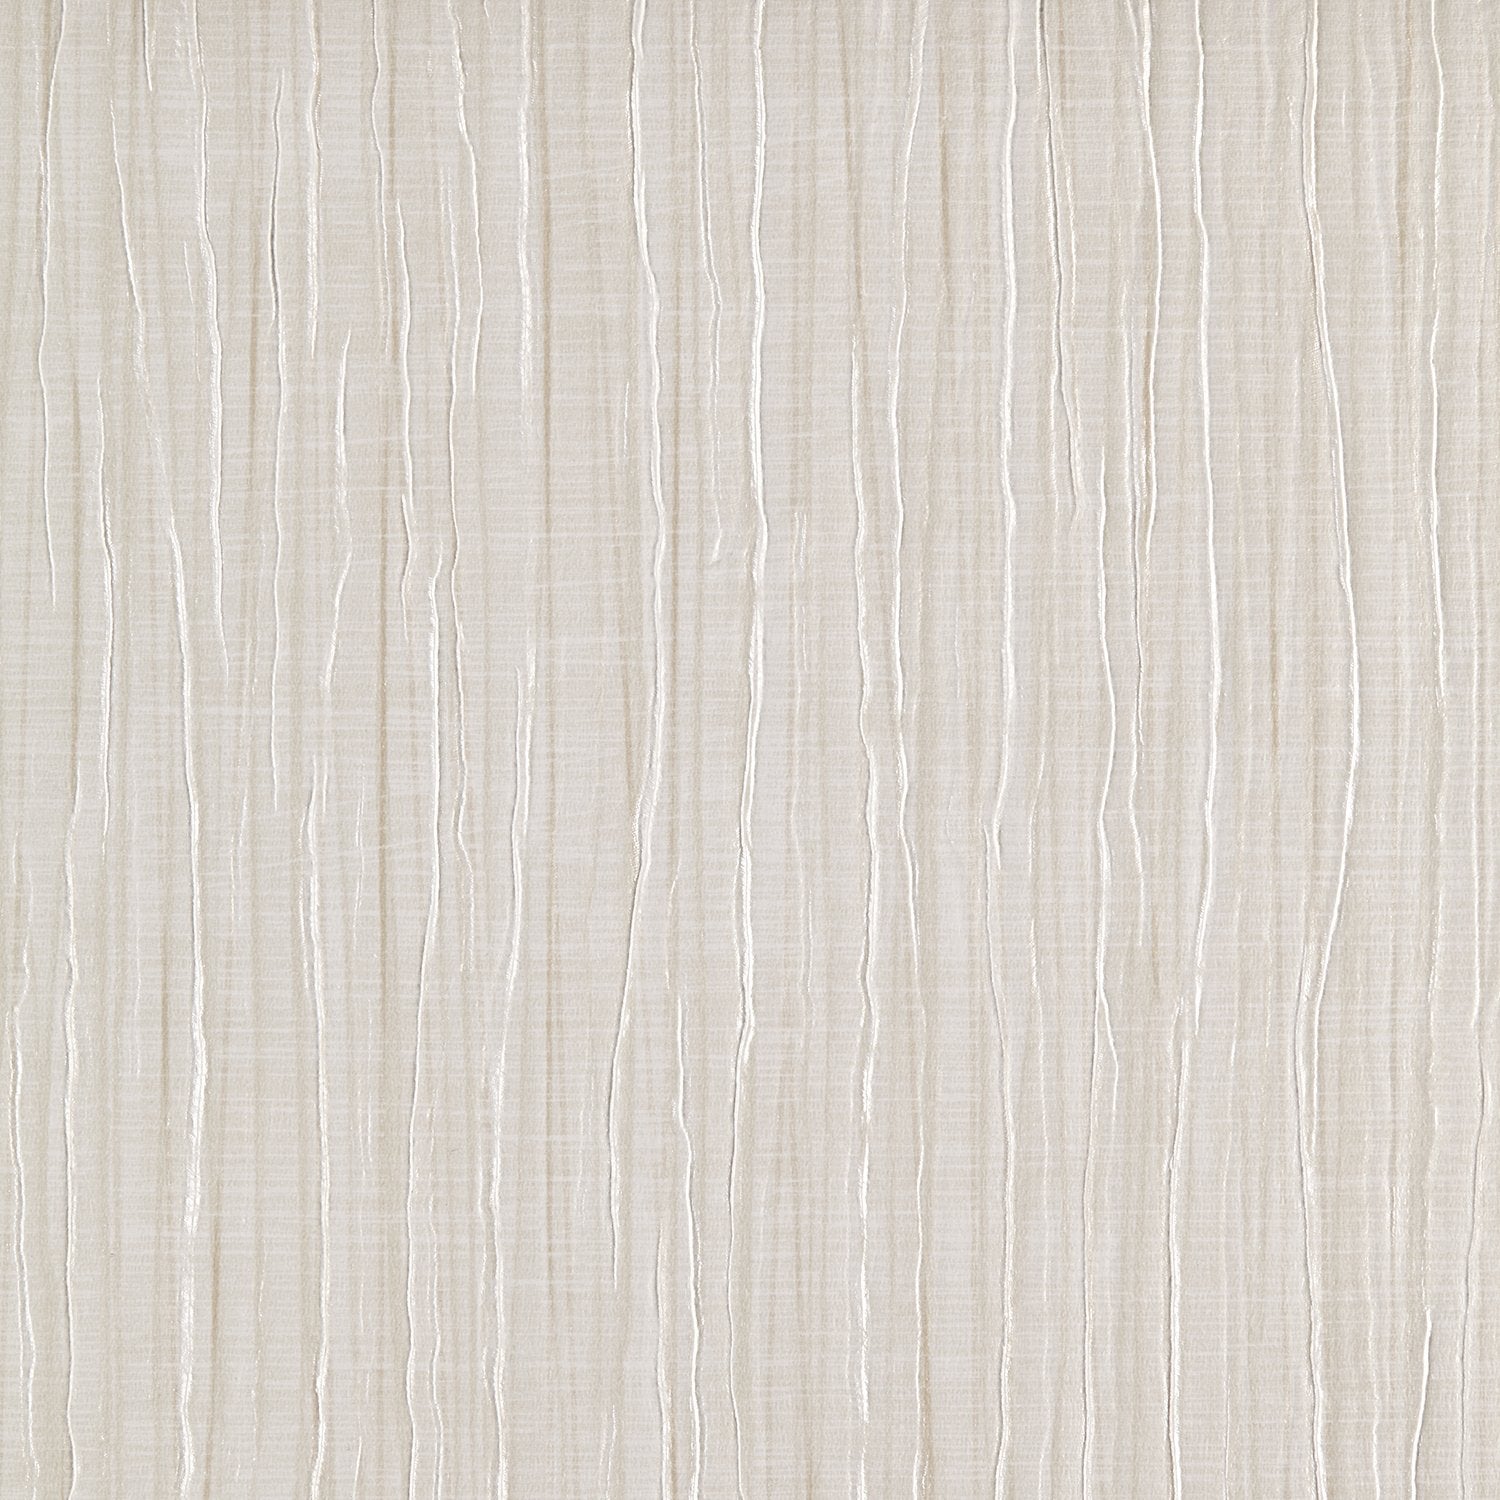 Vogue Pleat - Y47017 - Wallcovering - Vycon - Kube Contract